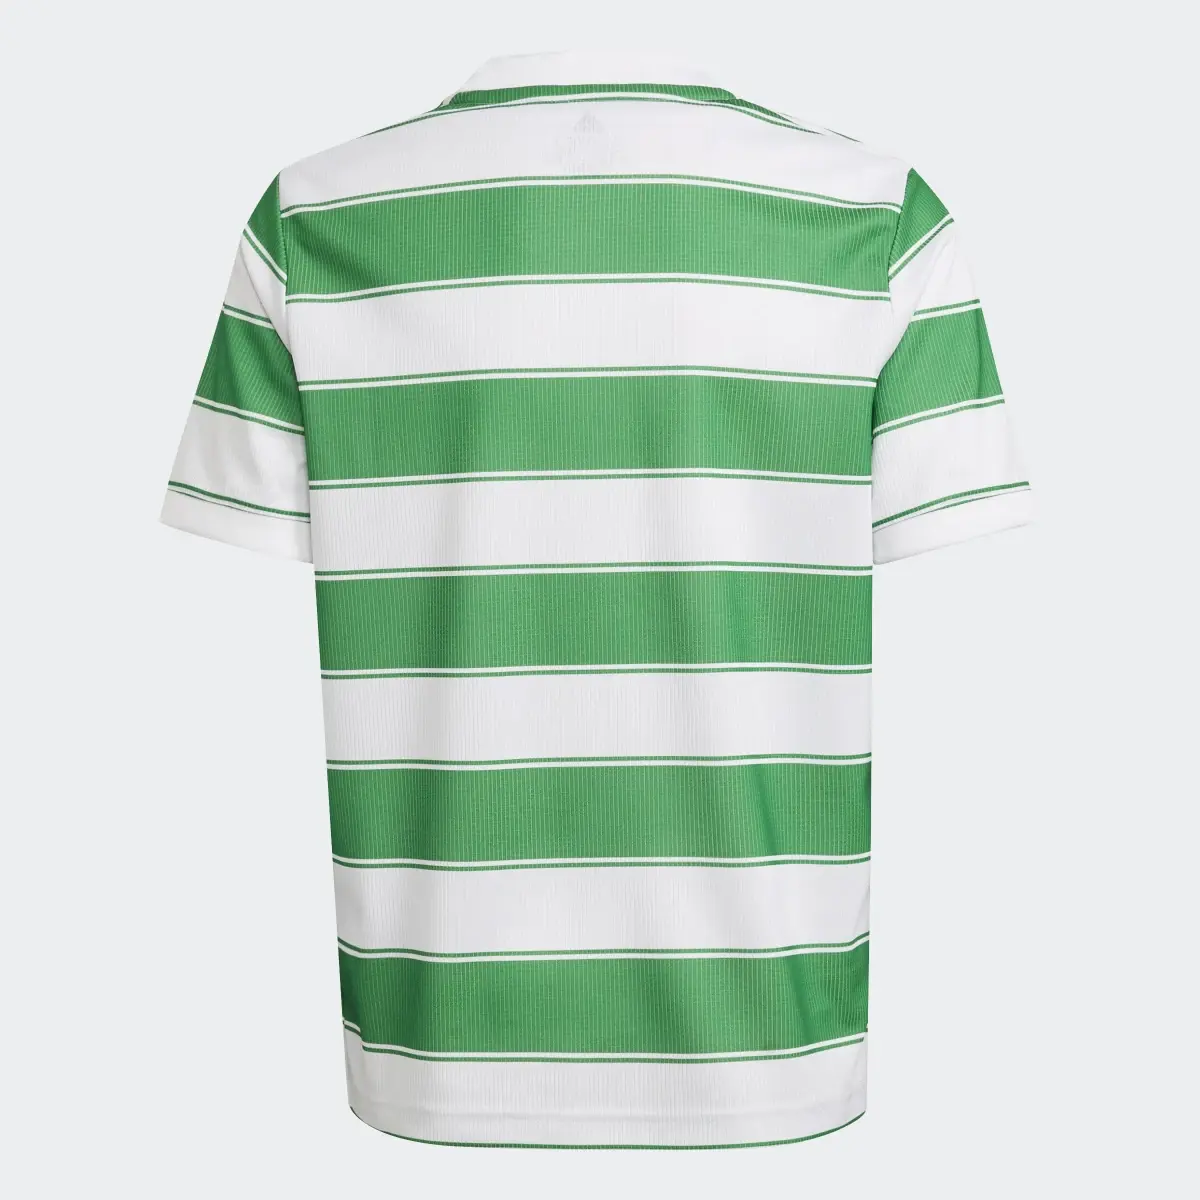 Adidas Celtic FC 21/22 Home Jersey. 2